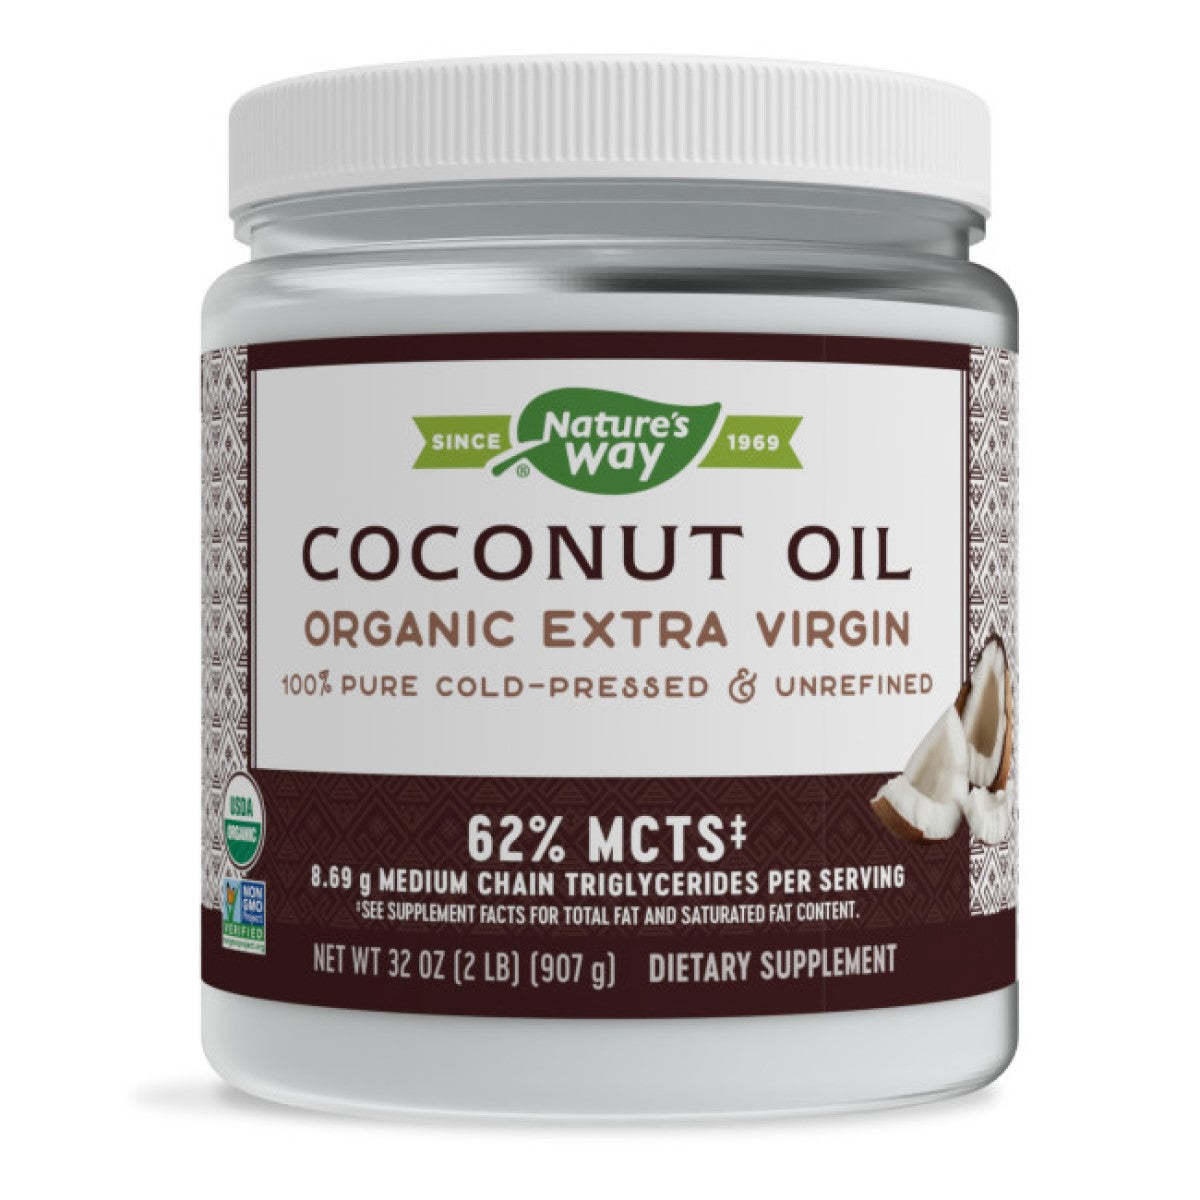 Primary image of Organic Extra Virgin Coconut Oil